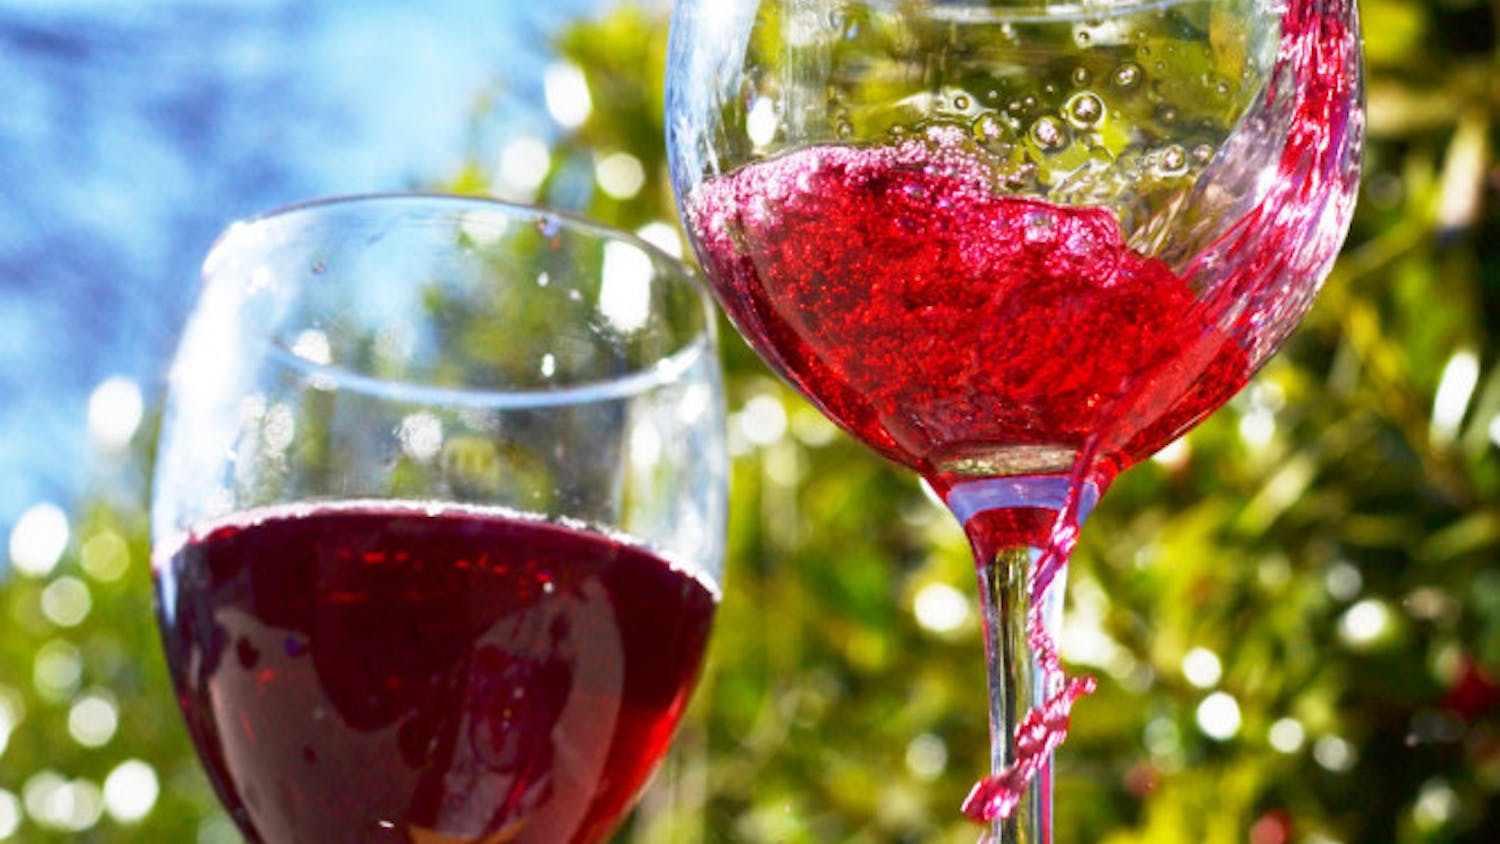 Research shows that women drink more wine